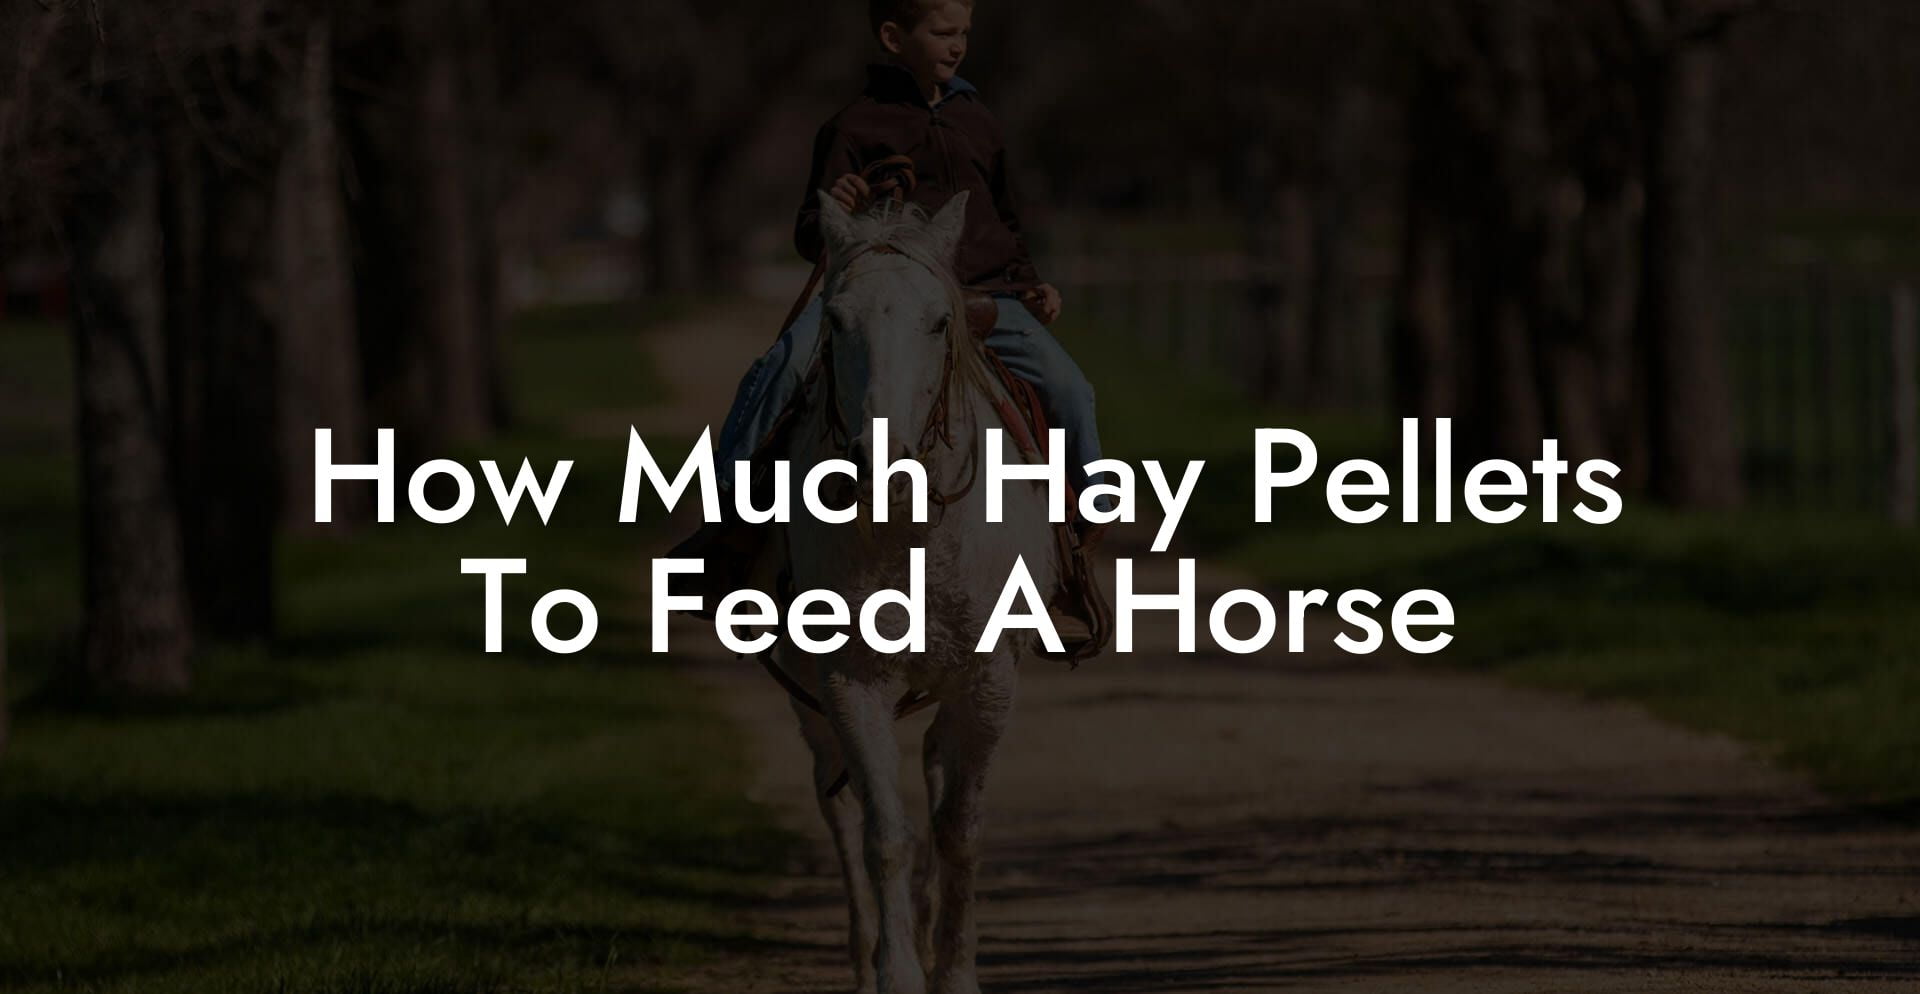 How Much Hay Pellets To Feed A Horse